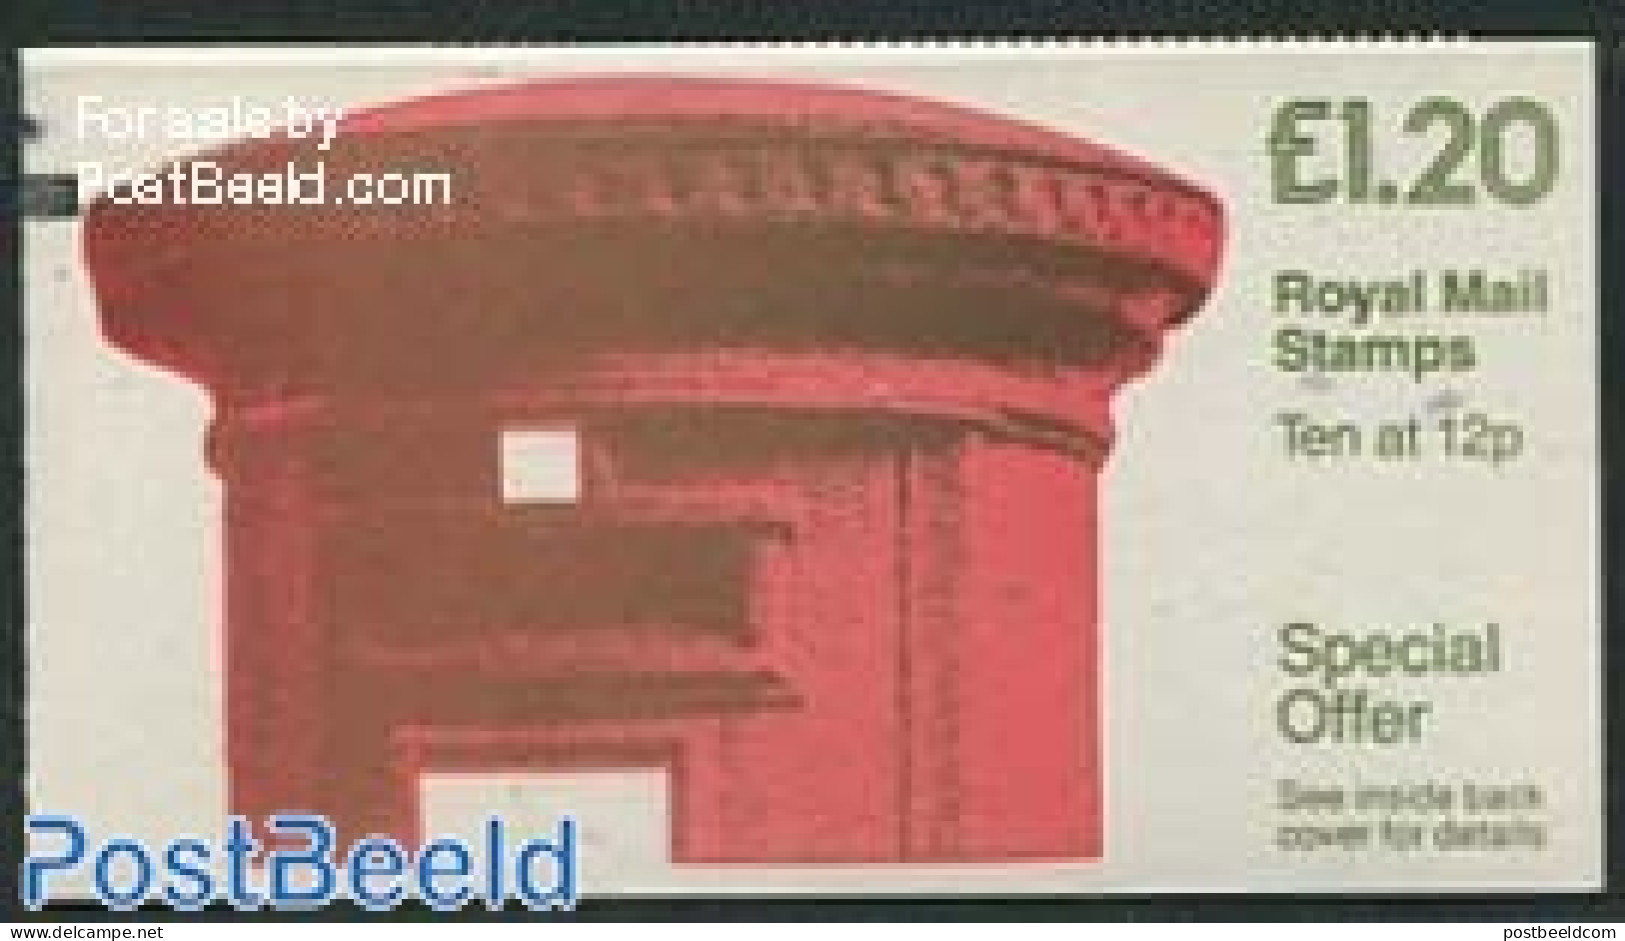 Great Britain 1986 Def. Booklet, Pillar Box, Selvedge At Left, Mint NH, Stamp Booklets - Unused Stamps